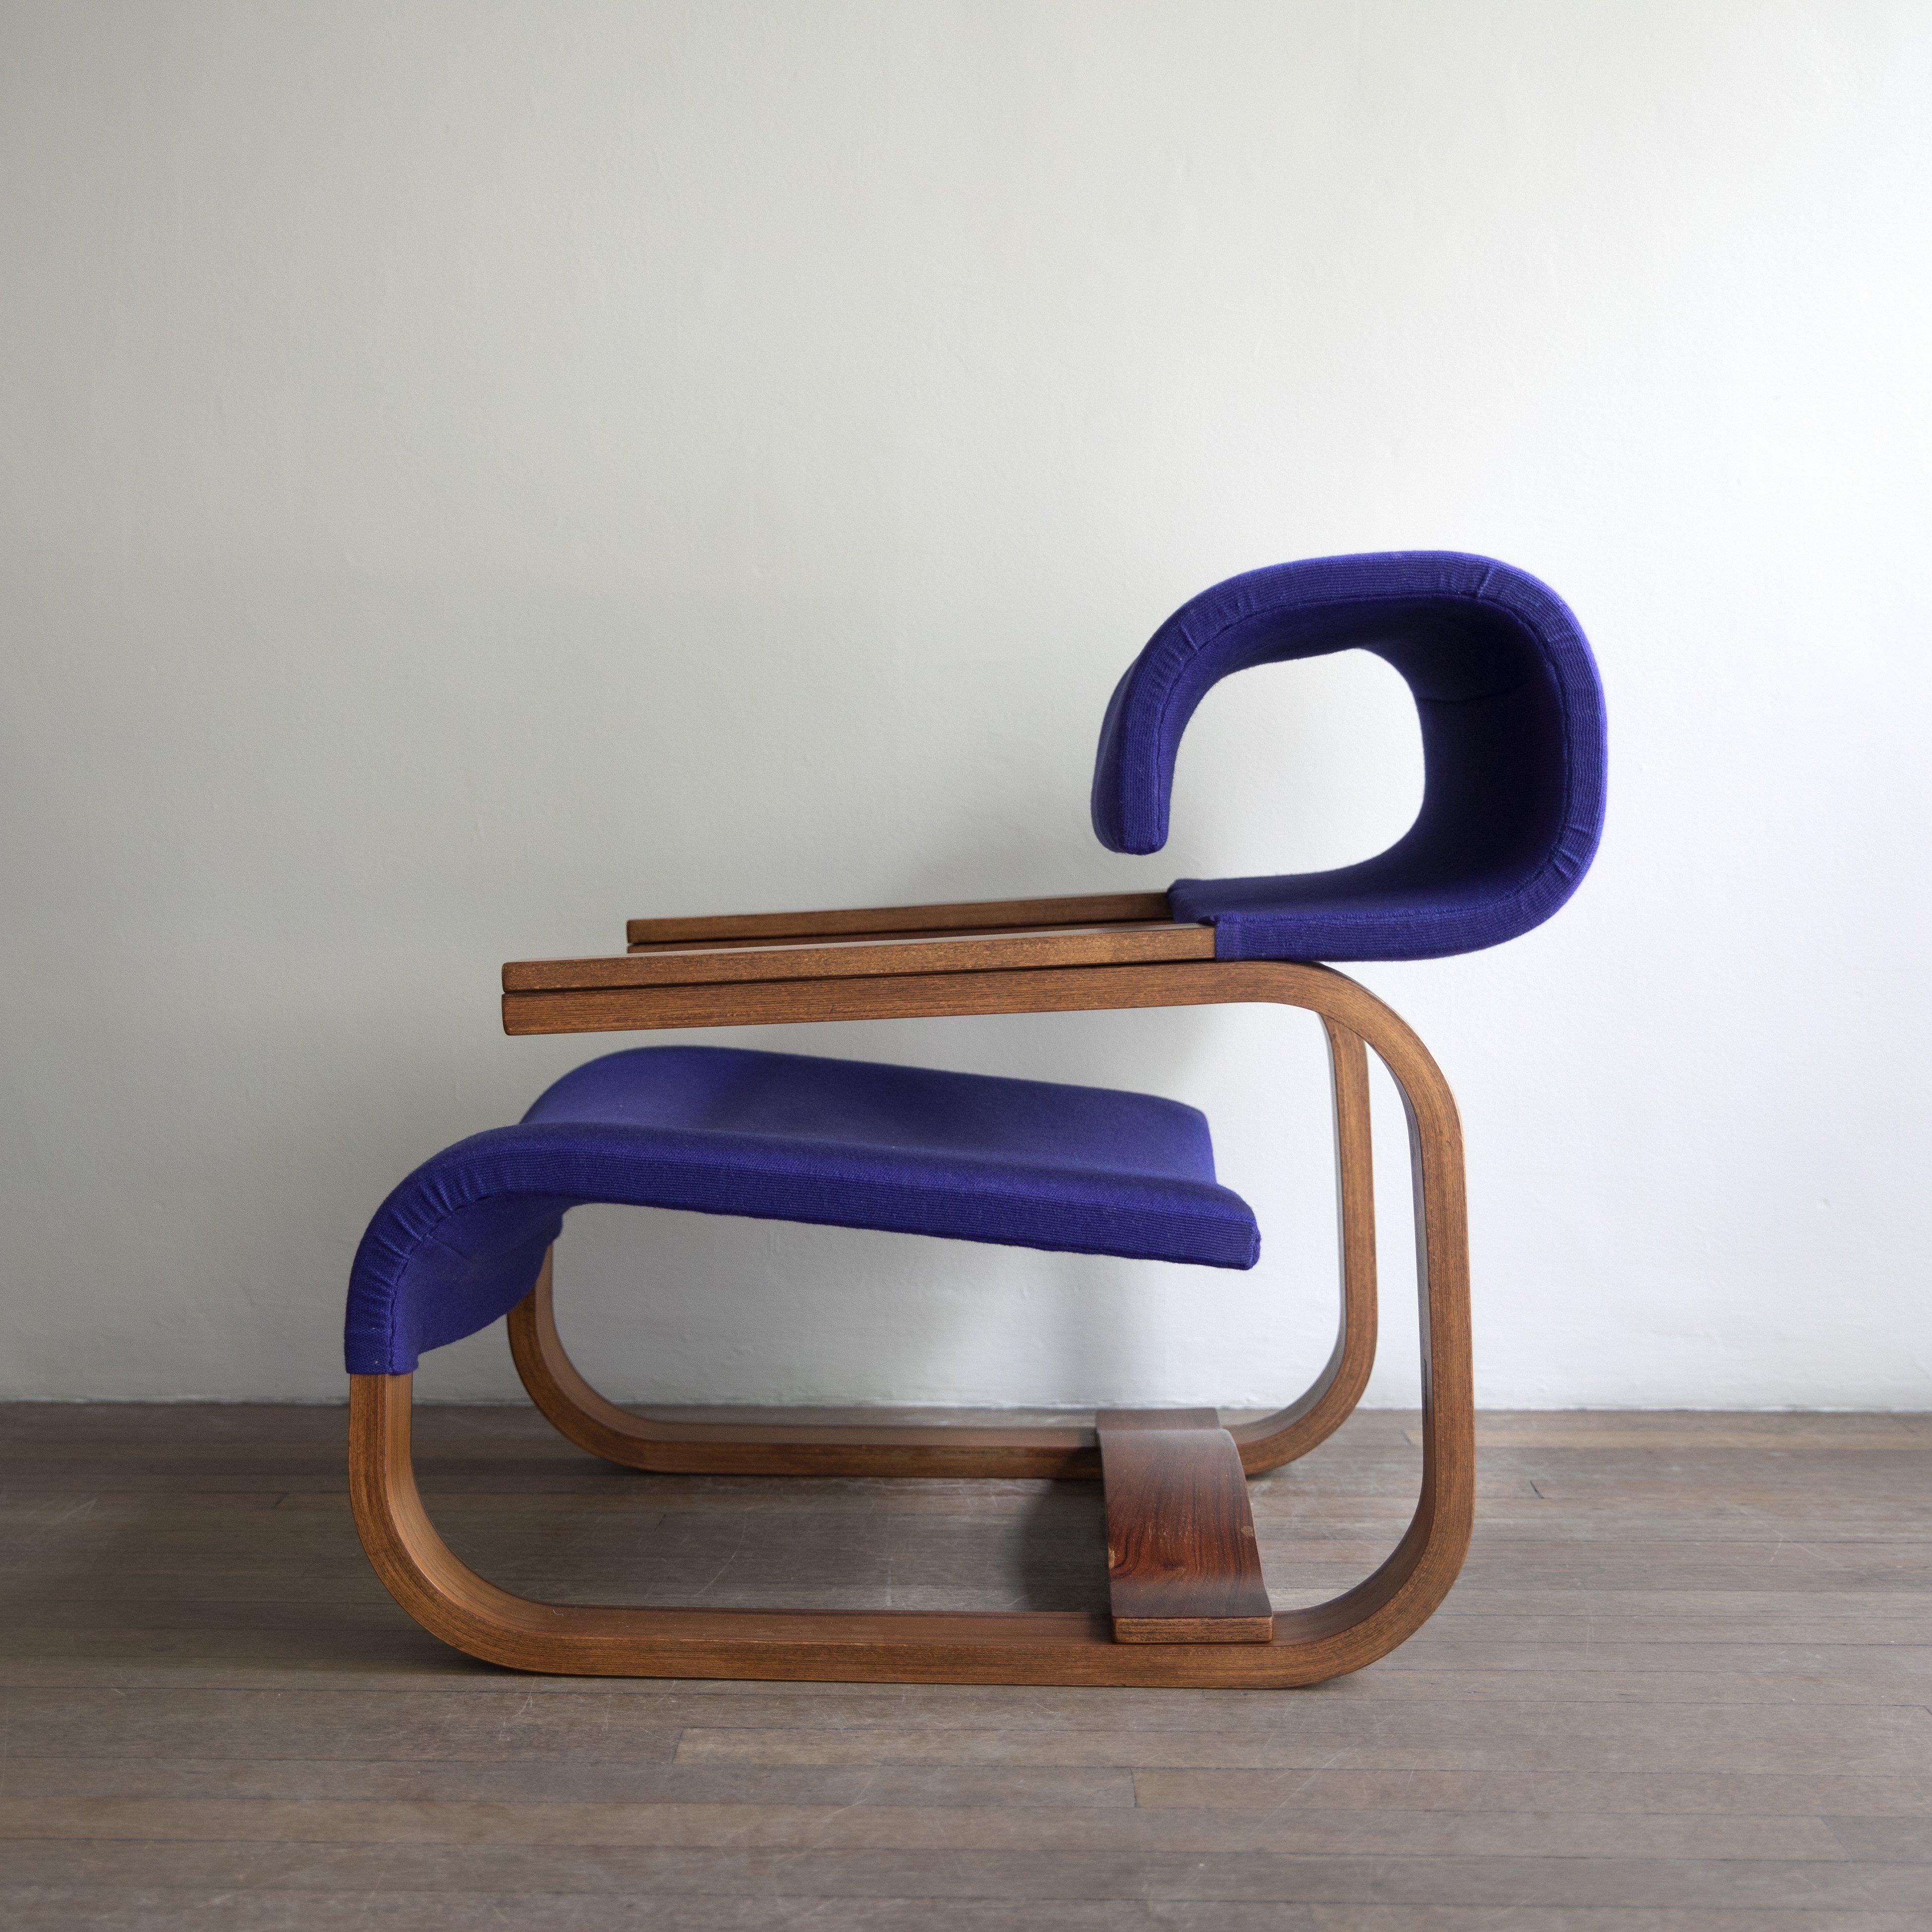 Price for pair.

Specifications:

Designer: Jan Bocan
Maker: Ton
Date of design: 1968-70
Date of manufacture: Before 1972
Materials: Bent laminated walnut wood and wool 
Width: 66 cm
Depth: 83.5 cm
Height: 75 cm
Provenance: Czech embassy